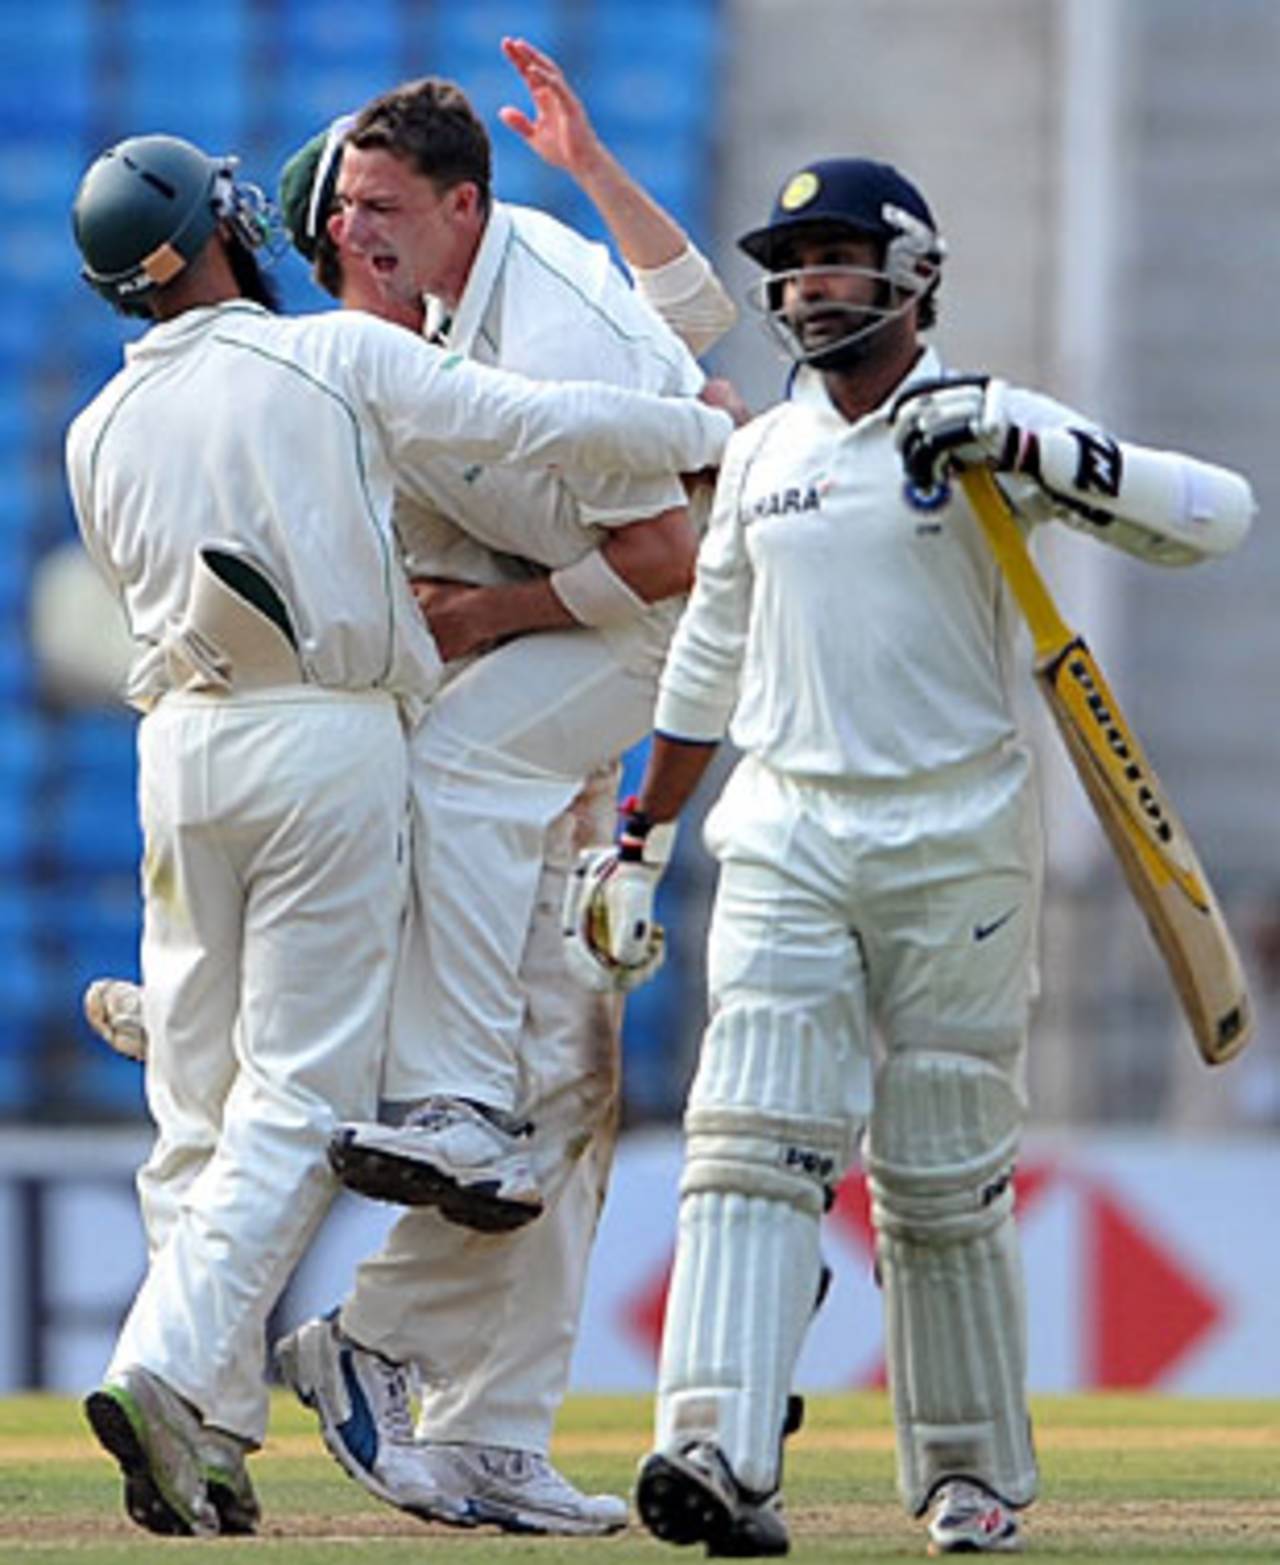 Dale Steyn ends India's hopes with Amit Mishra's wicket, India v South Africa, 1st Test, Nagpur, 4th day, February 9, 2010